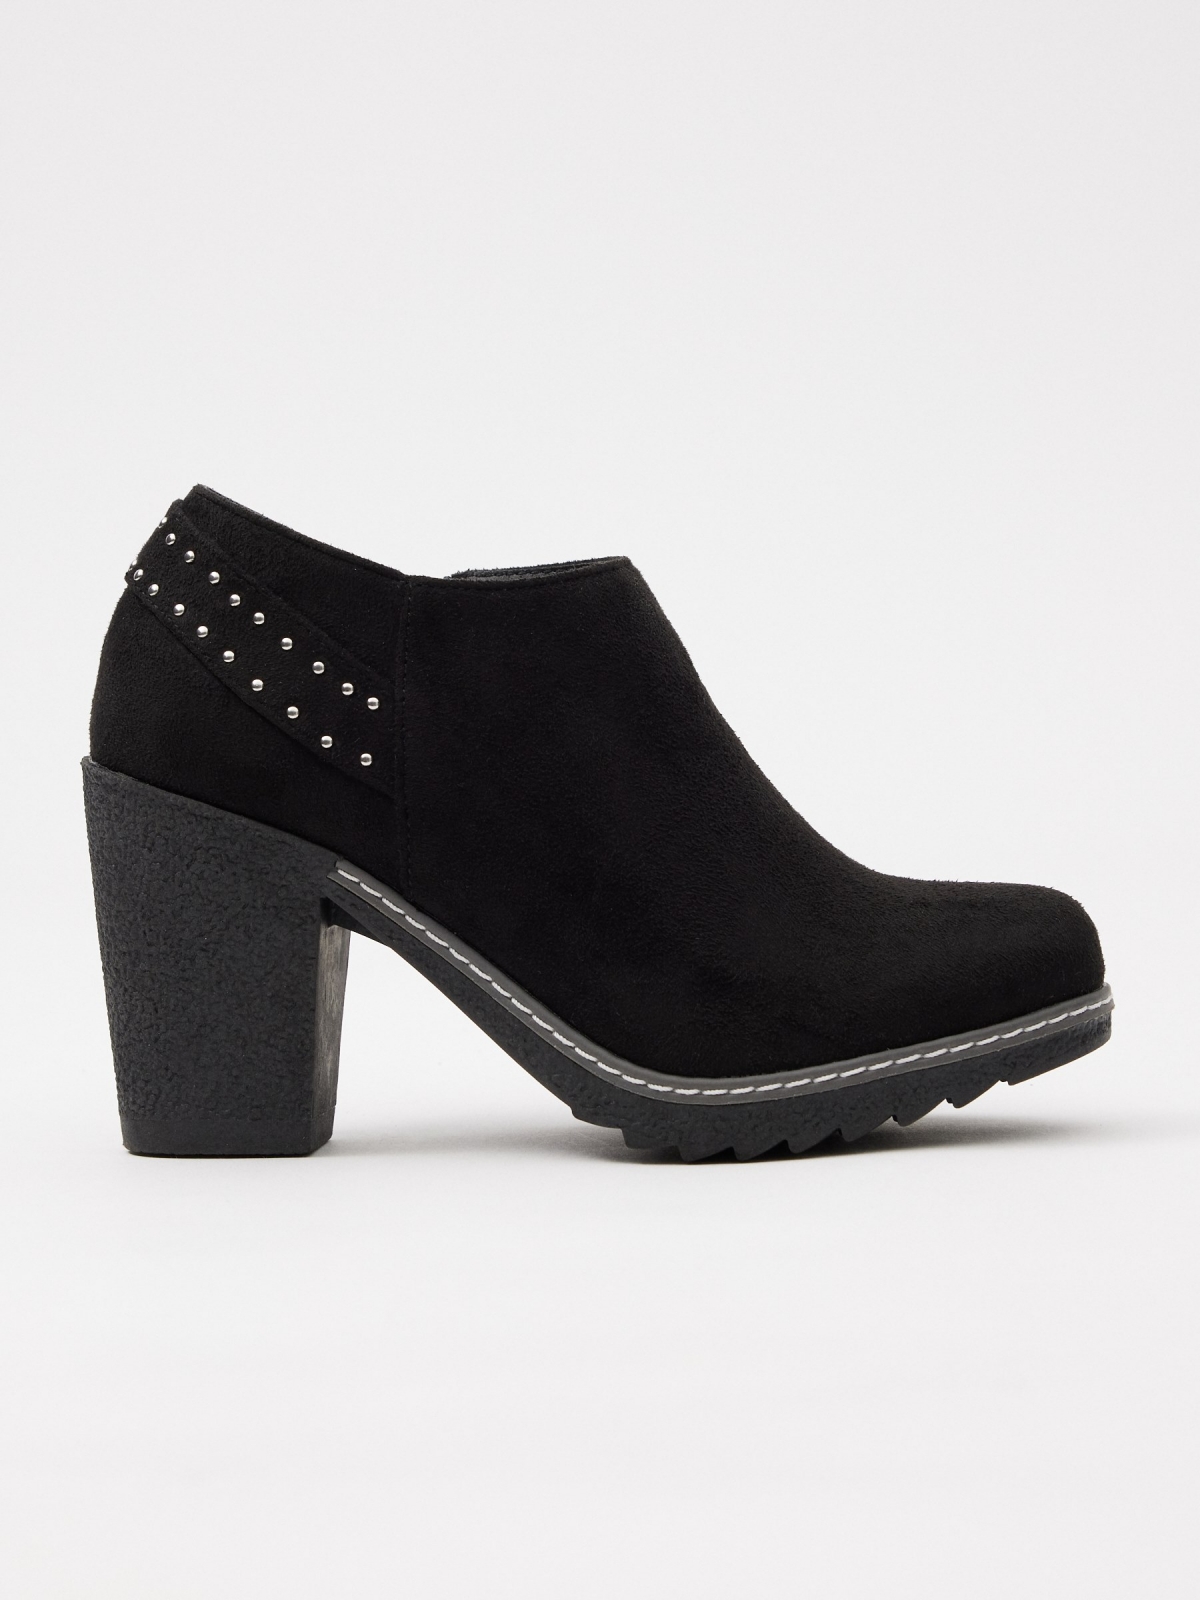 Studded ankle boots with wide heel